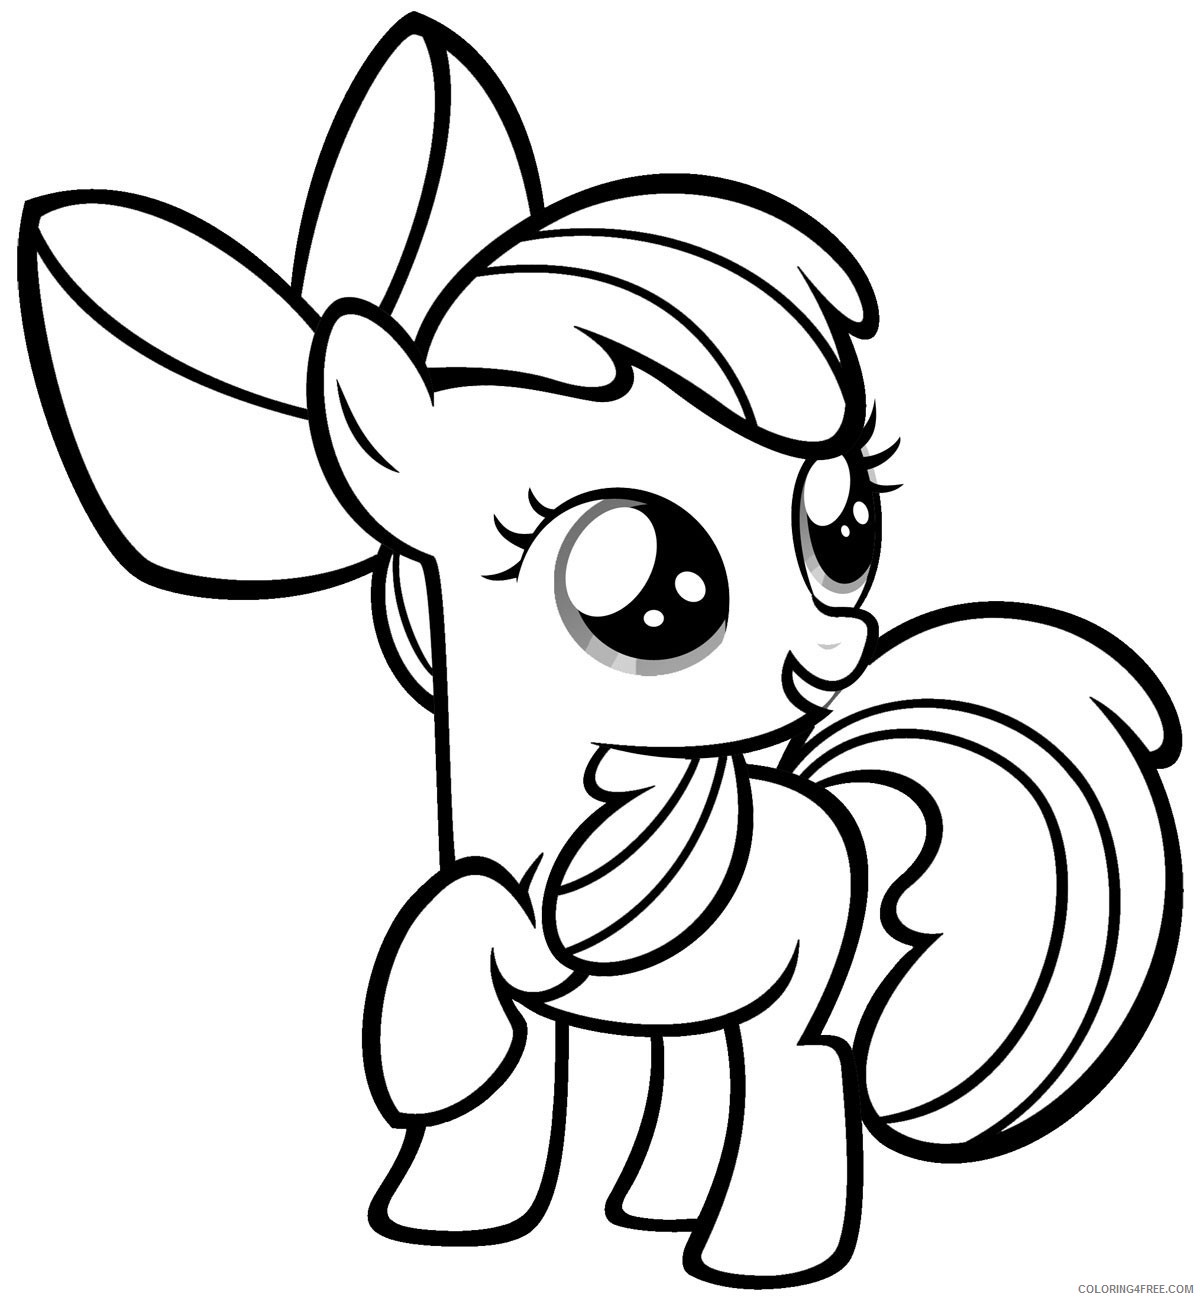 My Little Pony Coloring Pages Cartoons of My Little Pony Printable 2020 4430 Coloring4free